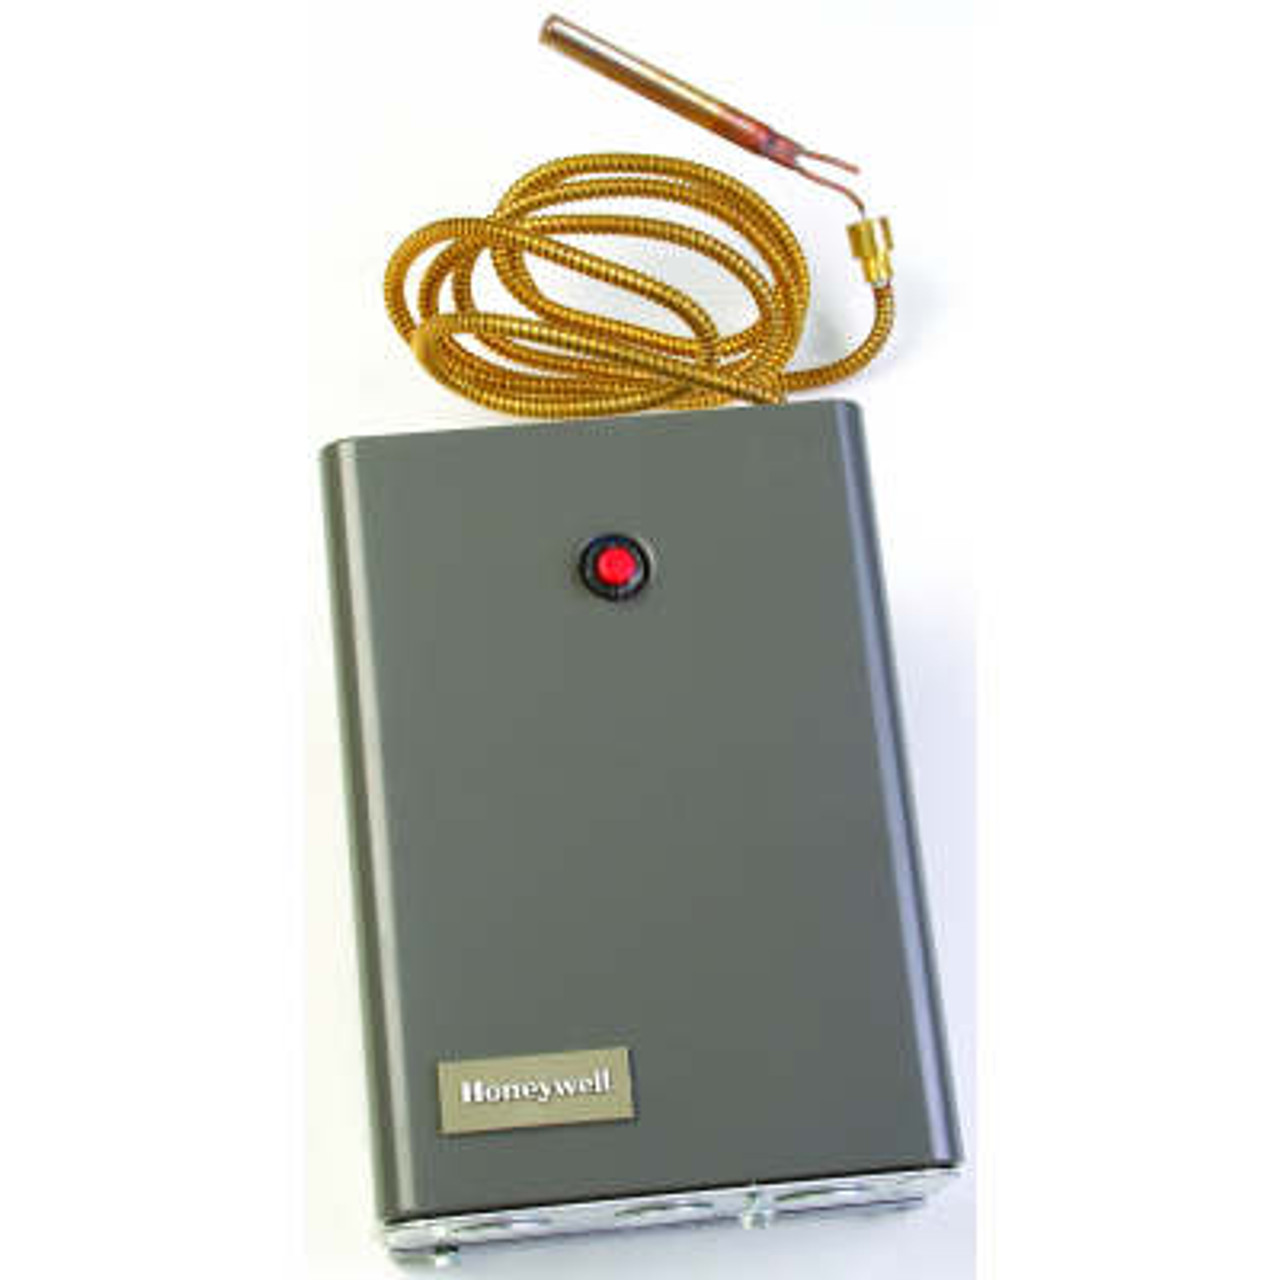 Honeywell R8182D1079 Combination Protectorelay and Hydronic Heating Control. Vertical mount